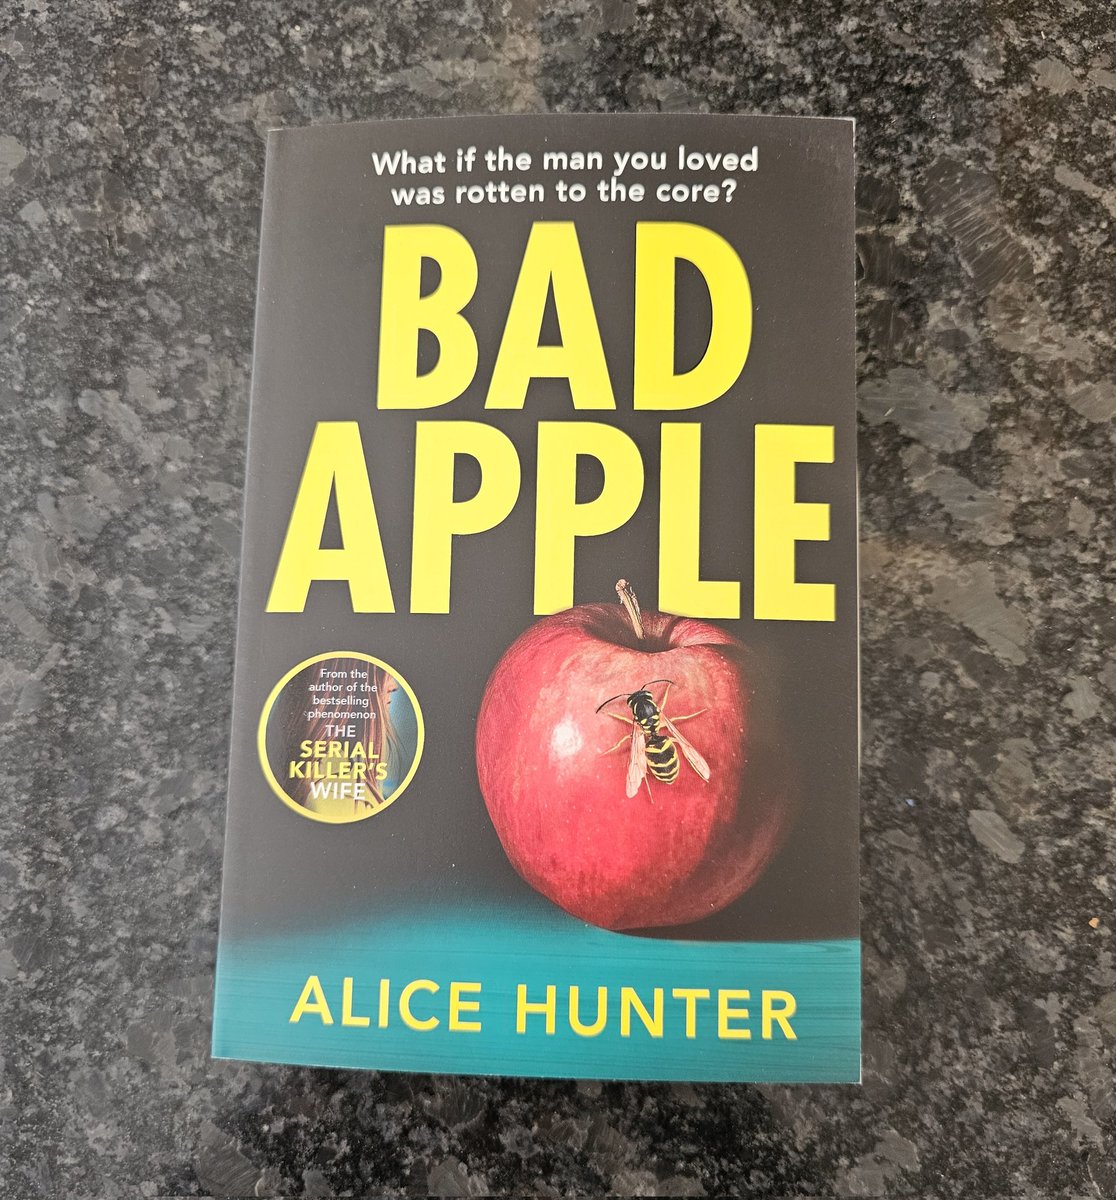 Thank you @AvonBooksUK for my copy of #BadApple @Alice_Hunter_1 Published on 9th May I can't wait to read this! #bookbloggers #bookX #booktwitter